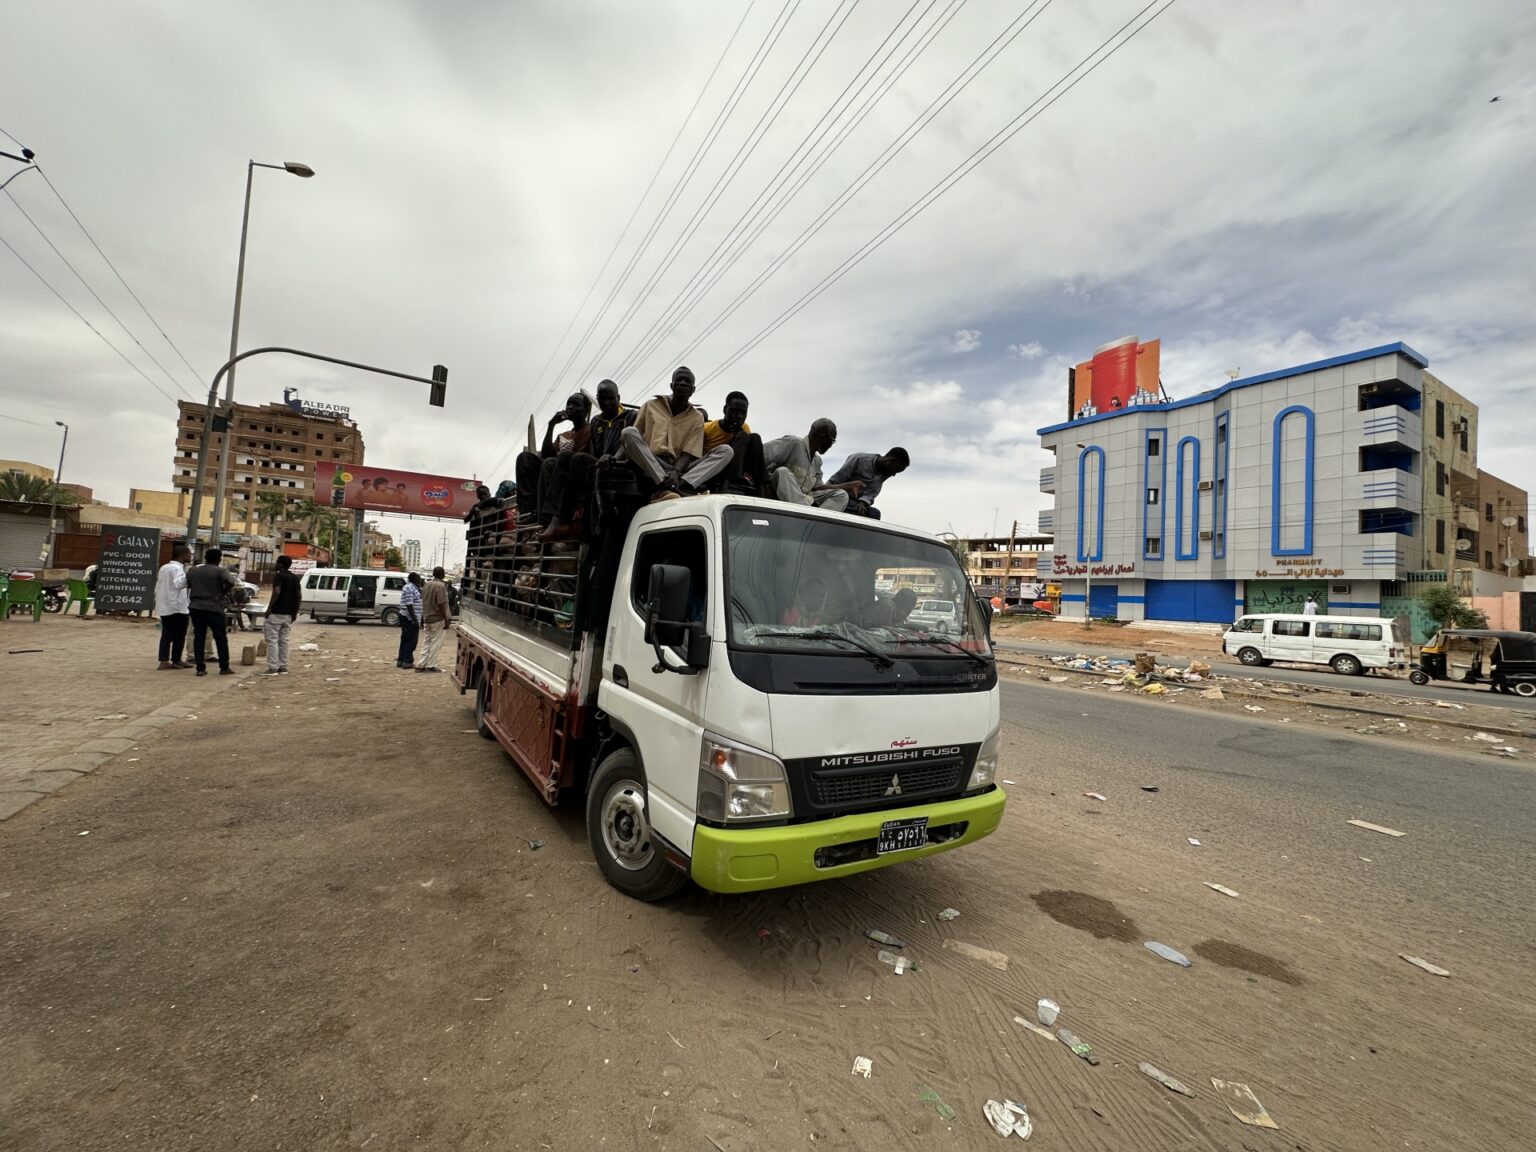 Sudan’s warring factions agree for seven days